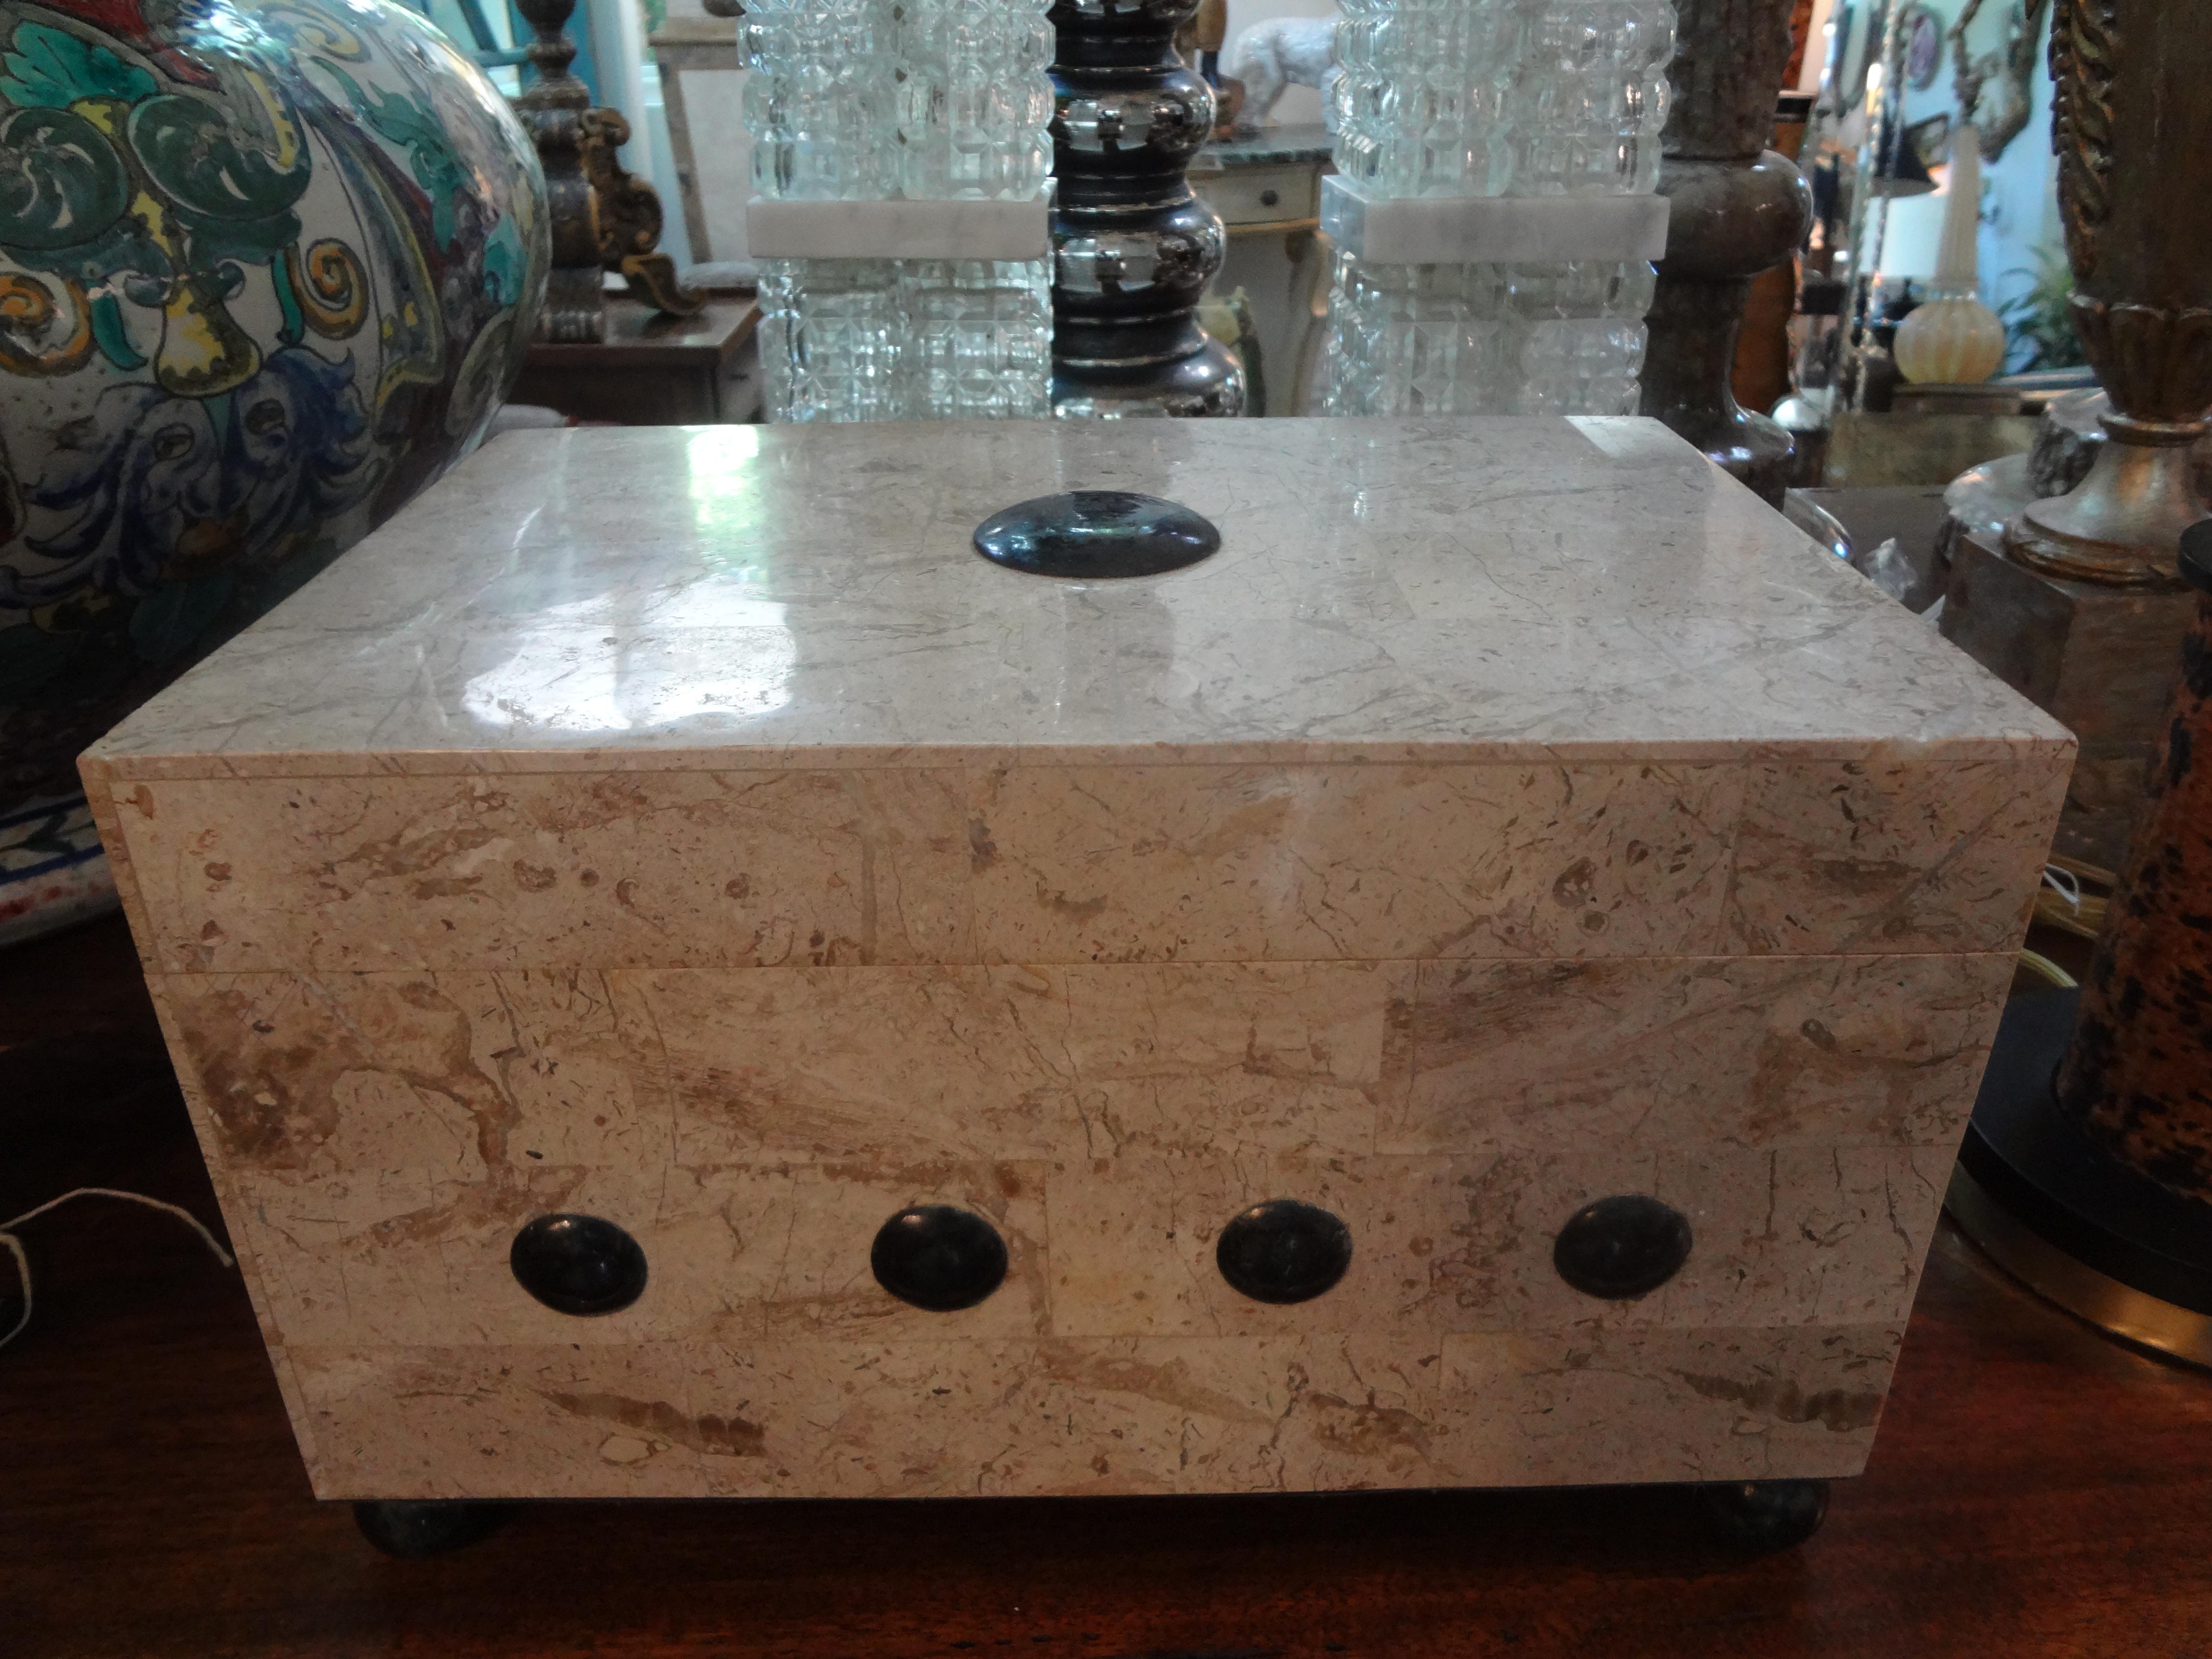 Beautifully crafted Maitland Smith tessellated stone box. This gorgeous hinged and lidded felt lined tessellated marble or stone box could be used as a jewelry box or decorative coffee table box. This vintage box is in the Art Deco style.